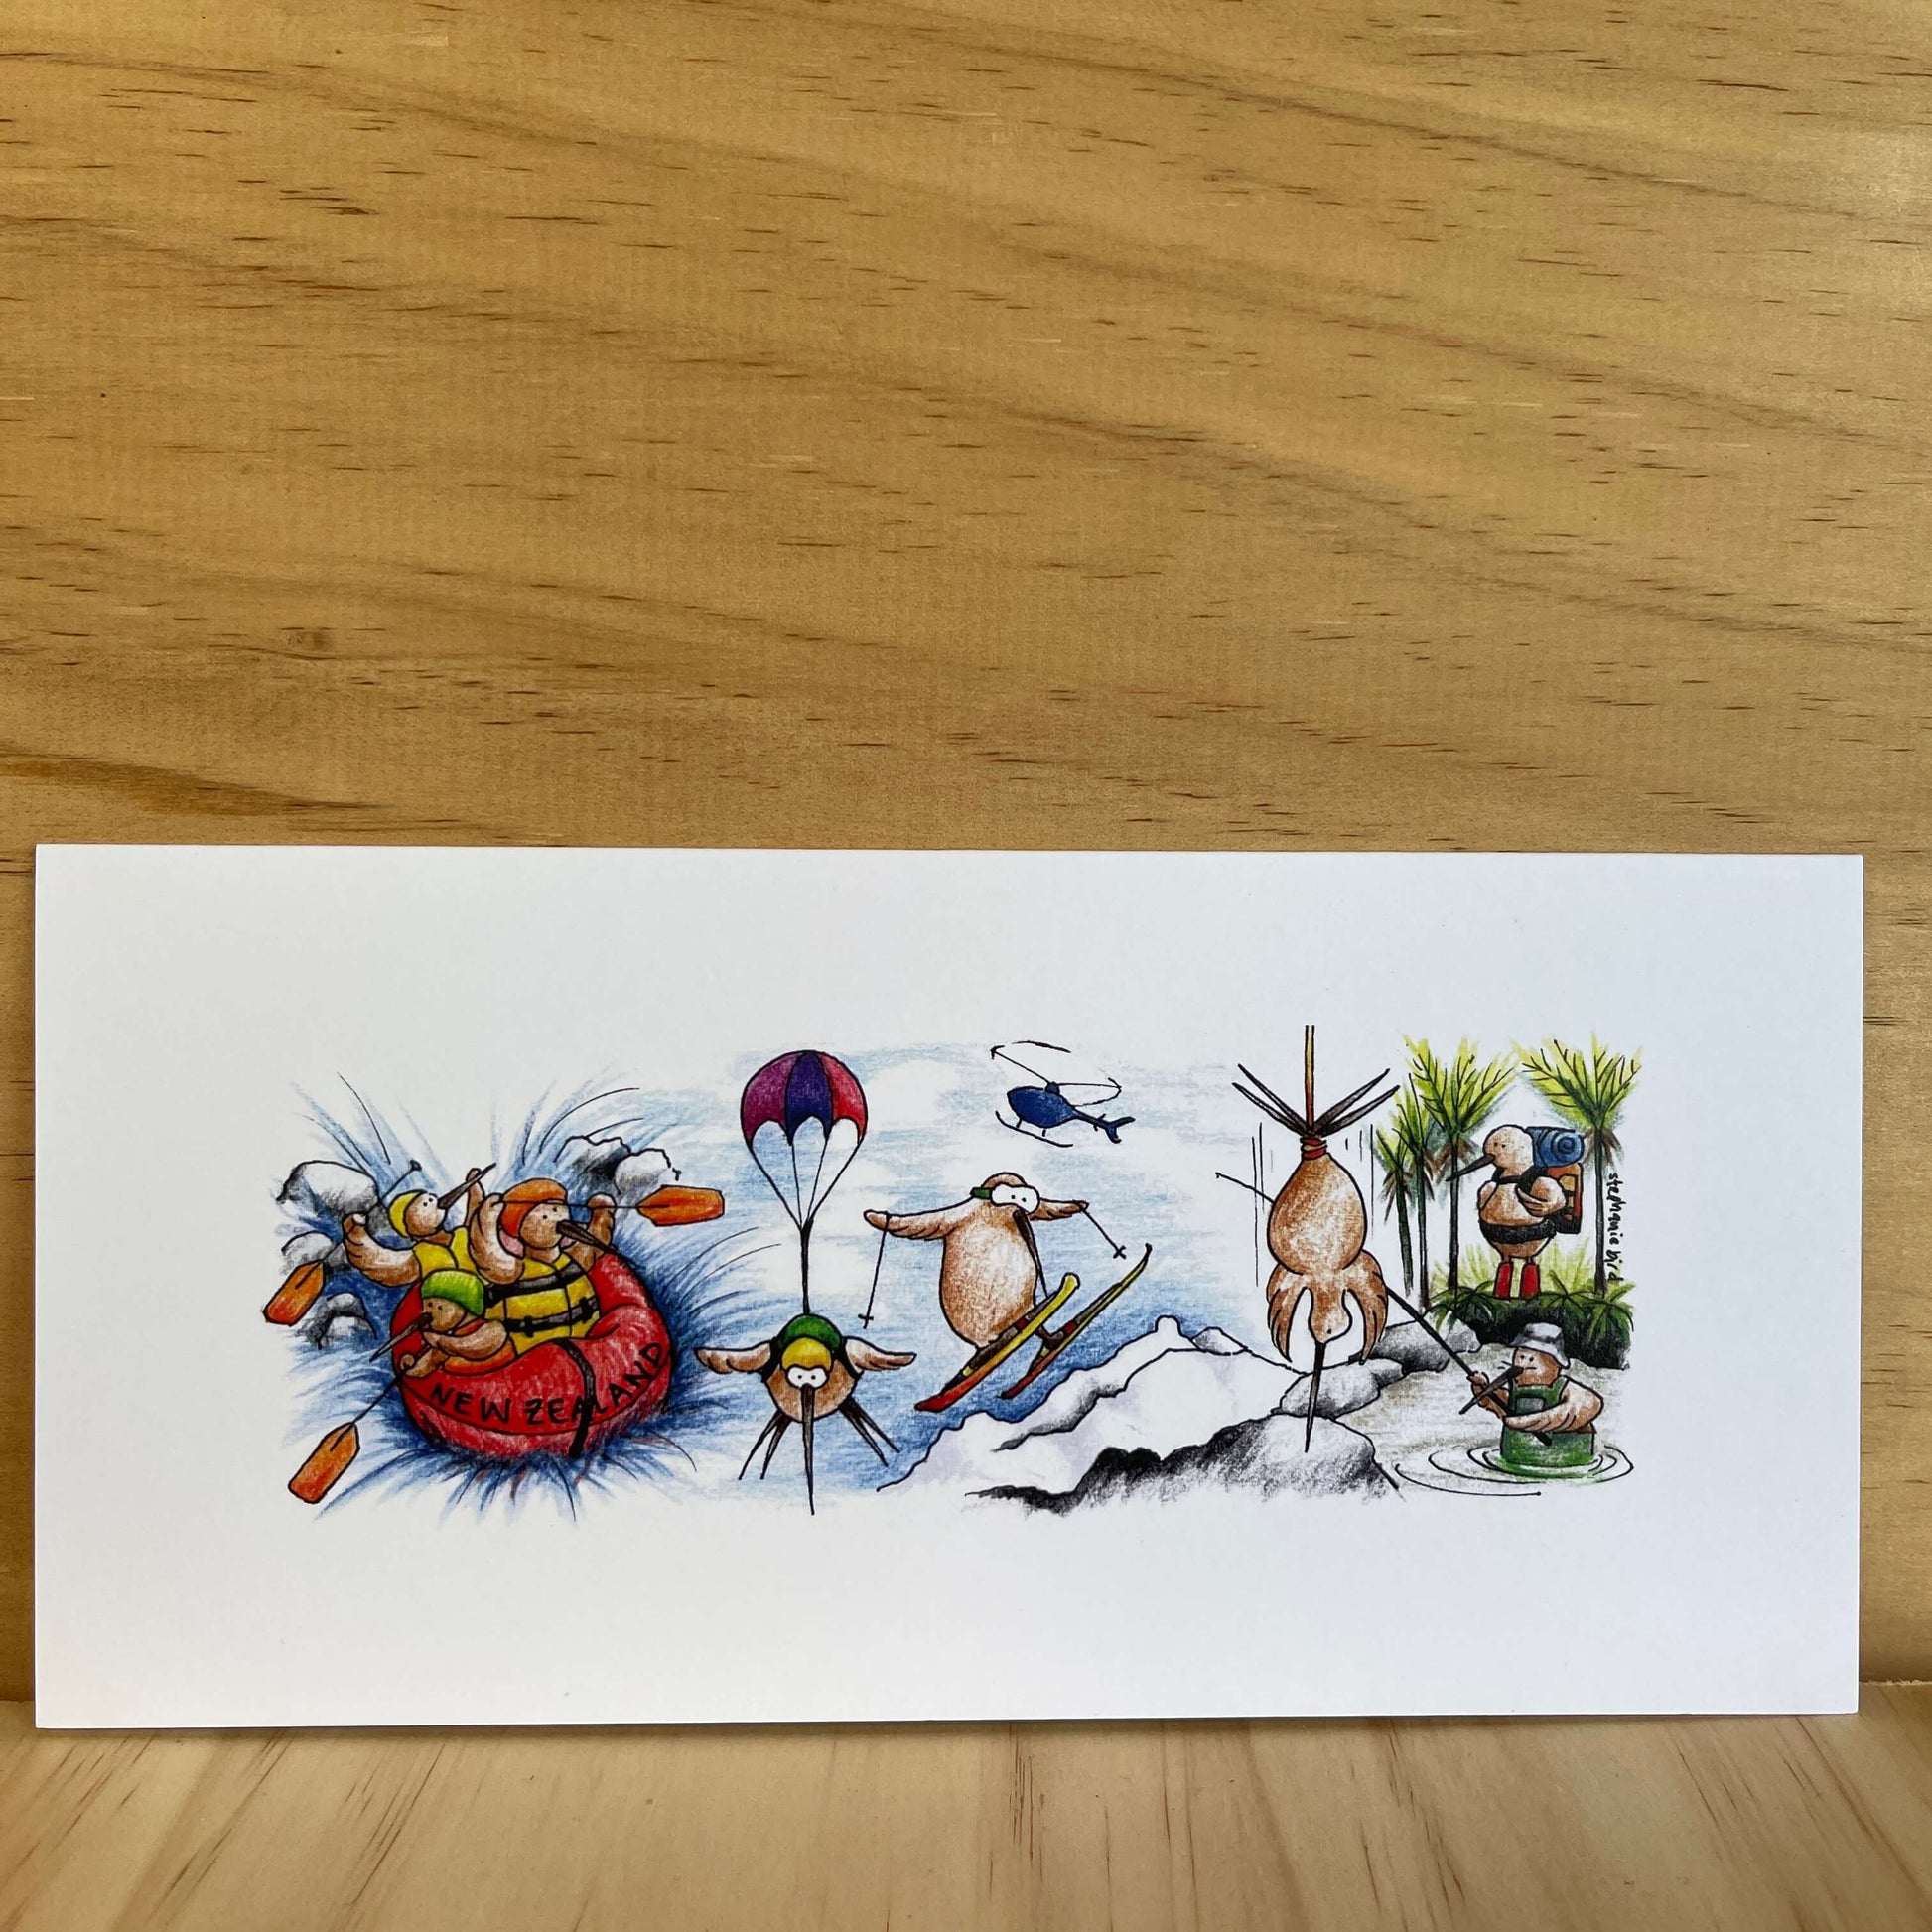 Greeting card with Kiwi birds skiing, hiking, bungy jumping and rafting.